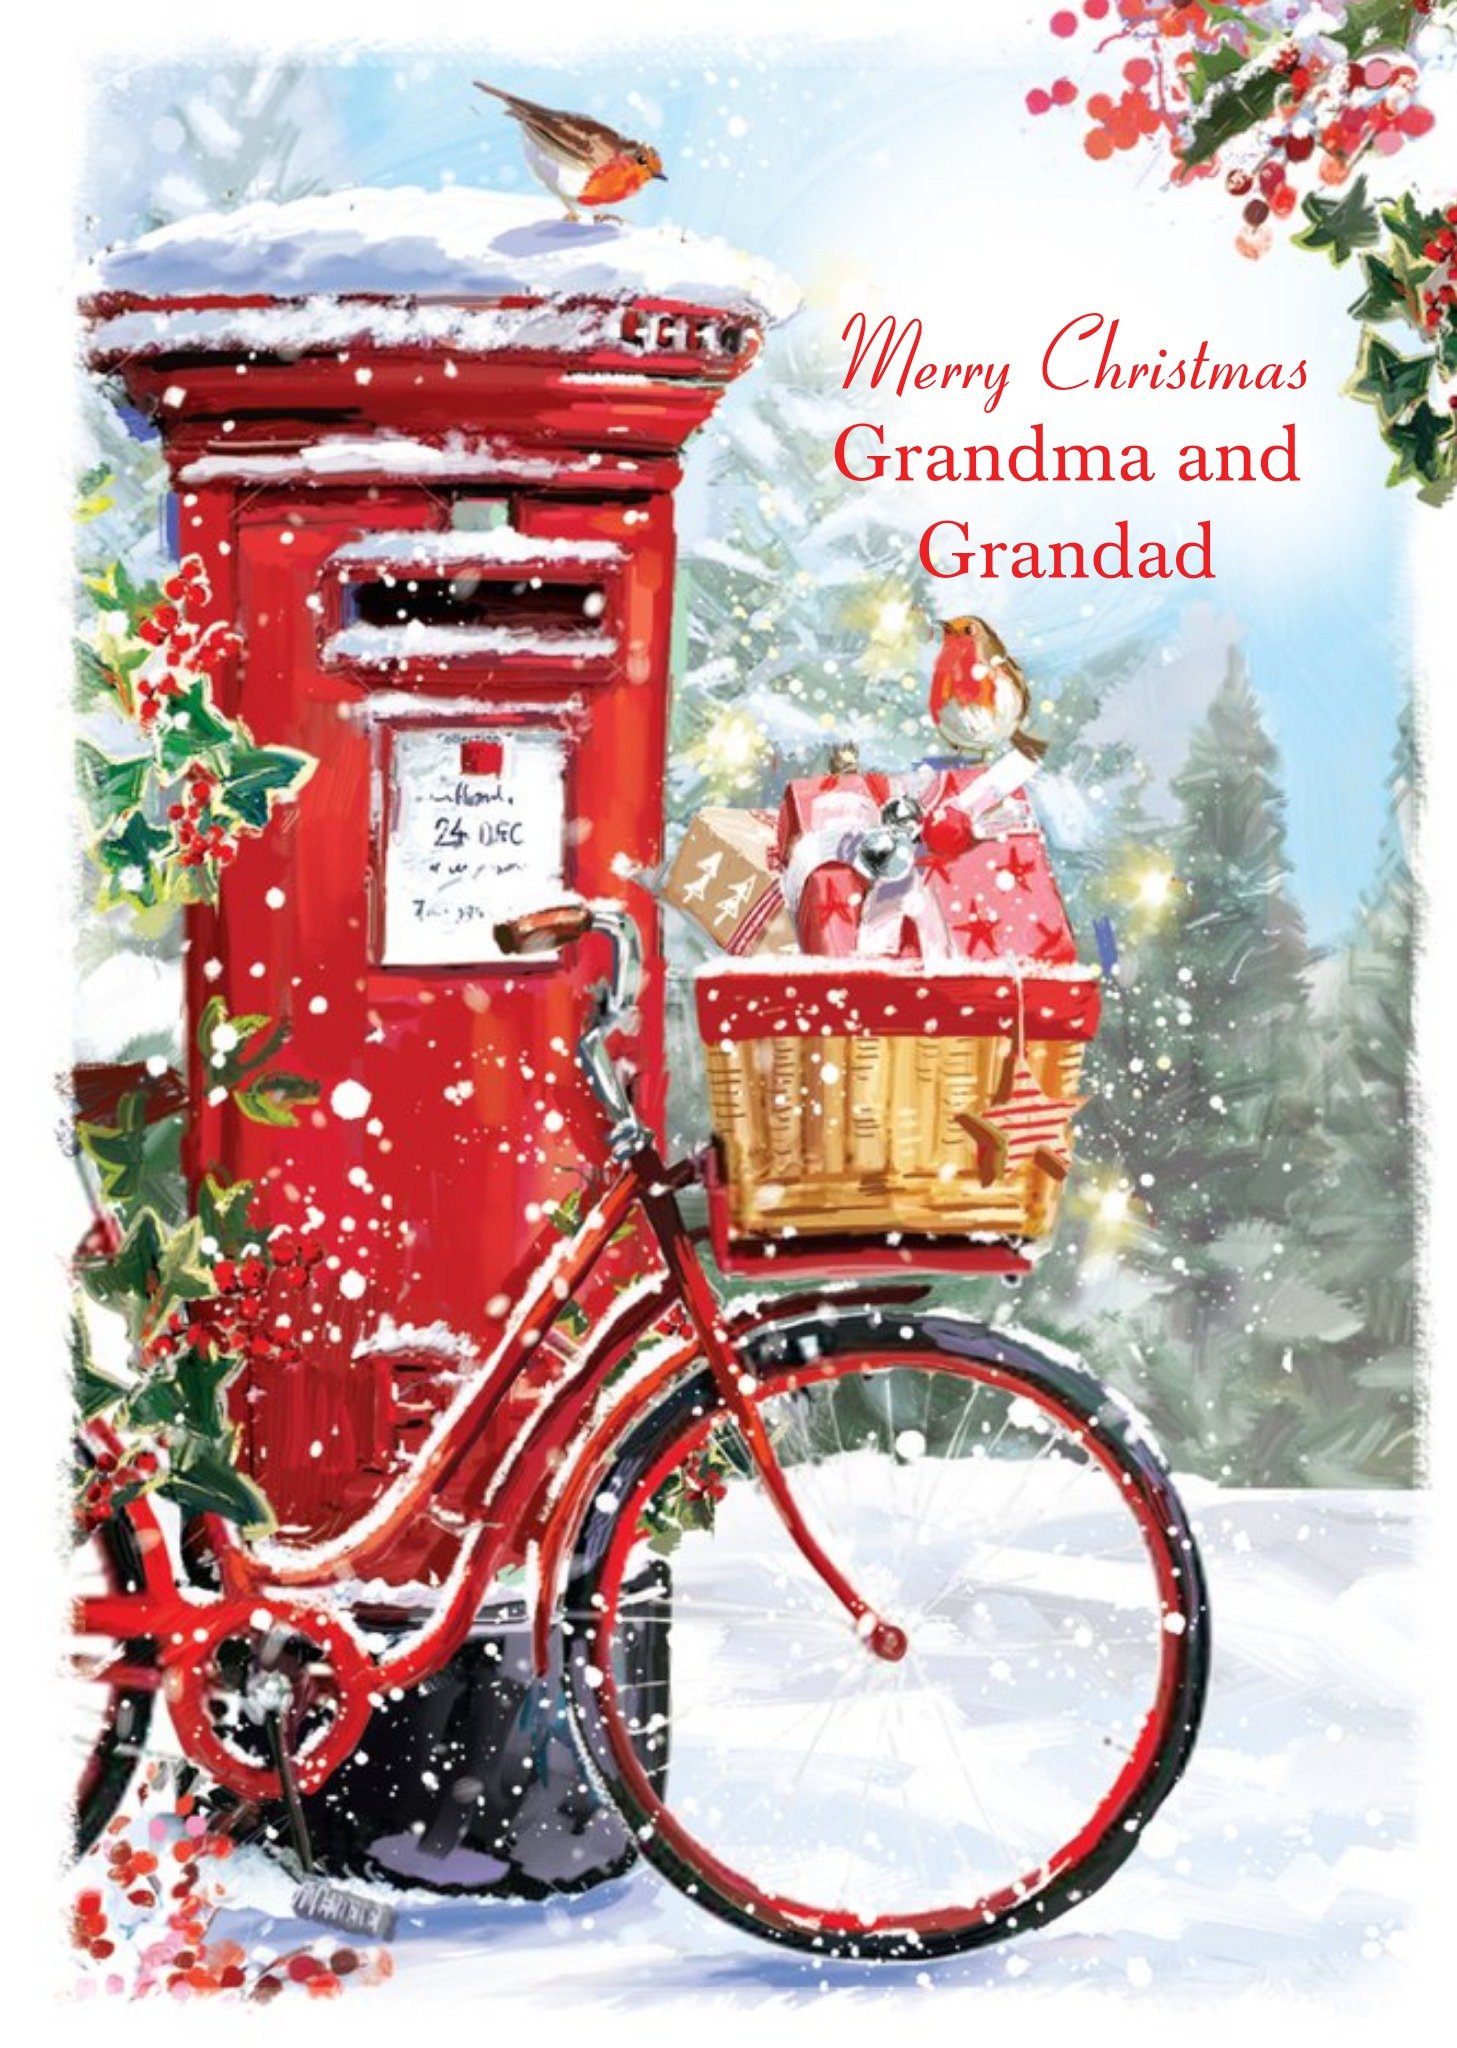 Ling Design Traditional Post Box Christmas Card For Granny And Grandad, Large